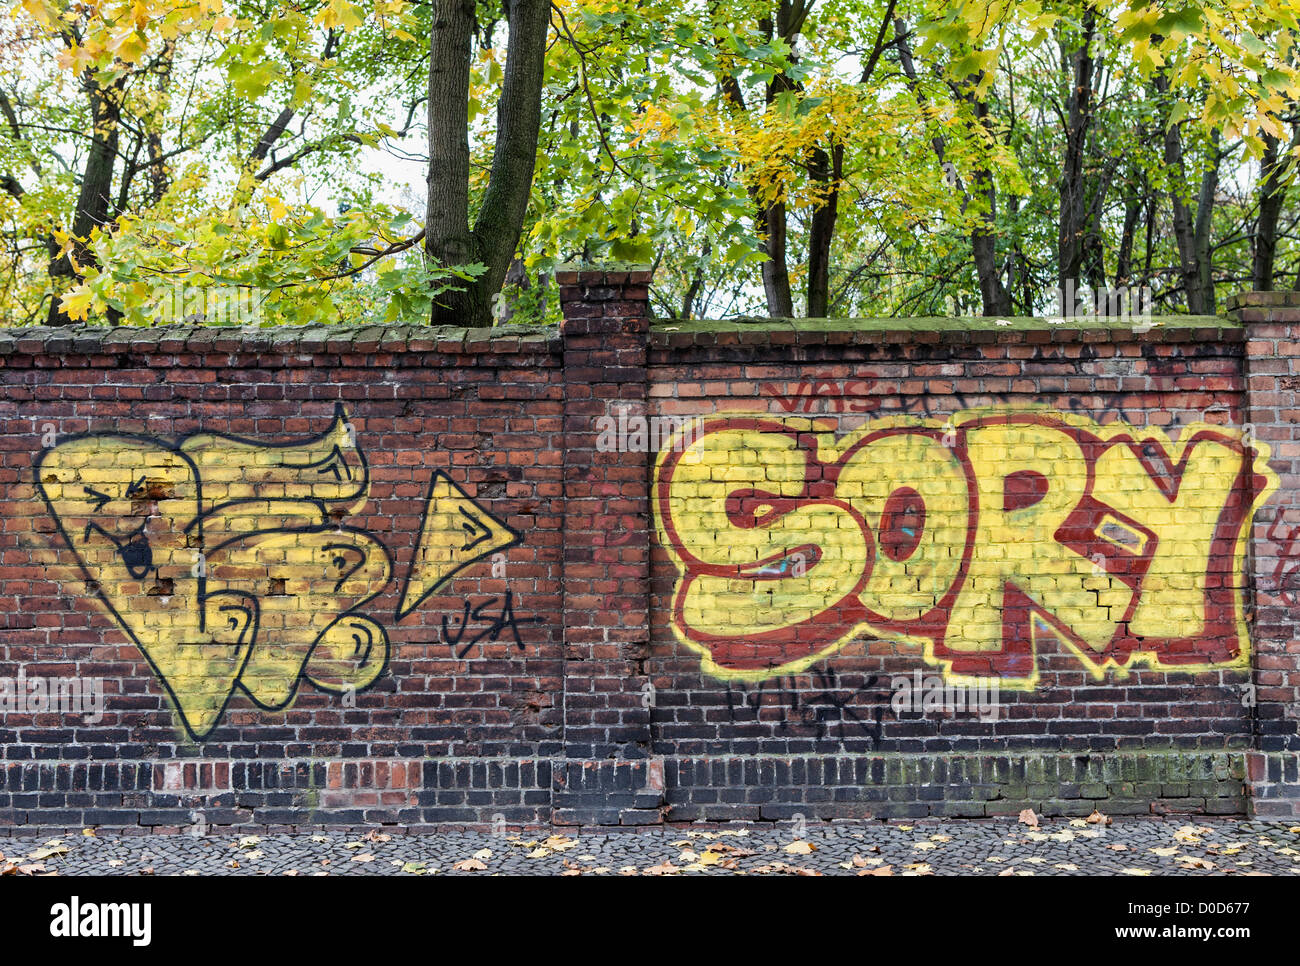 A graffiti-covered wall of the Friedhof der Sophien Gemeinde, Mitte, Berlin Stock Photo